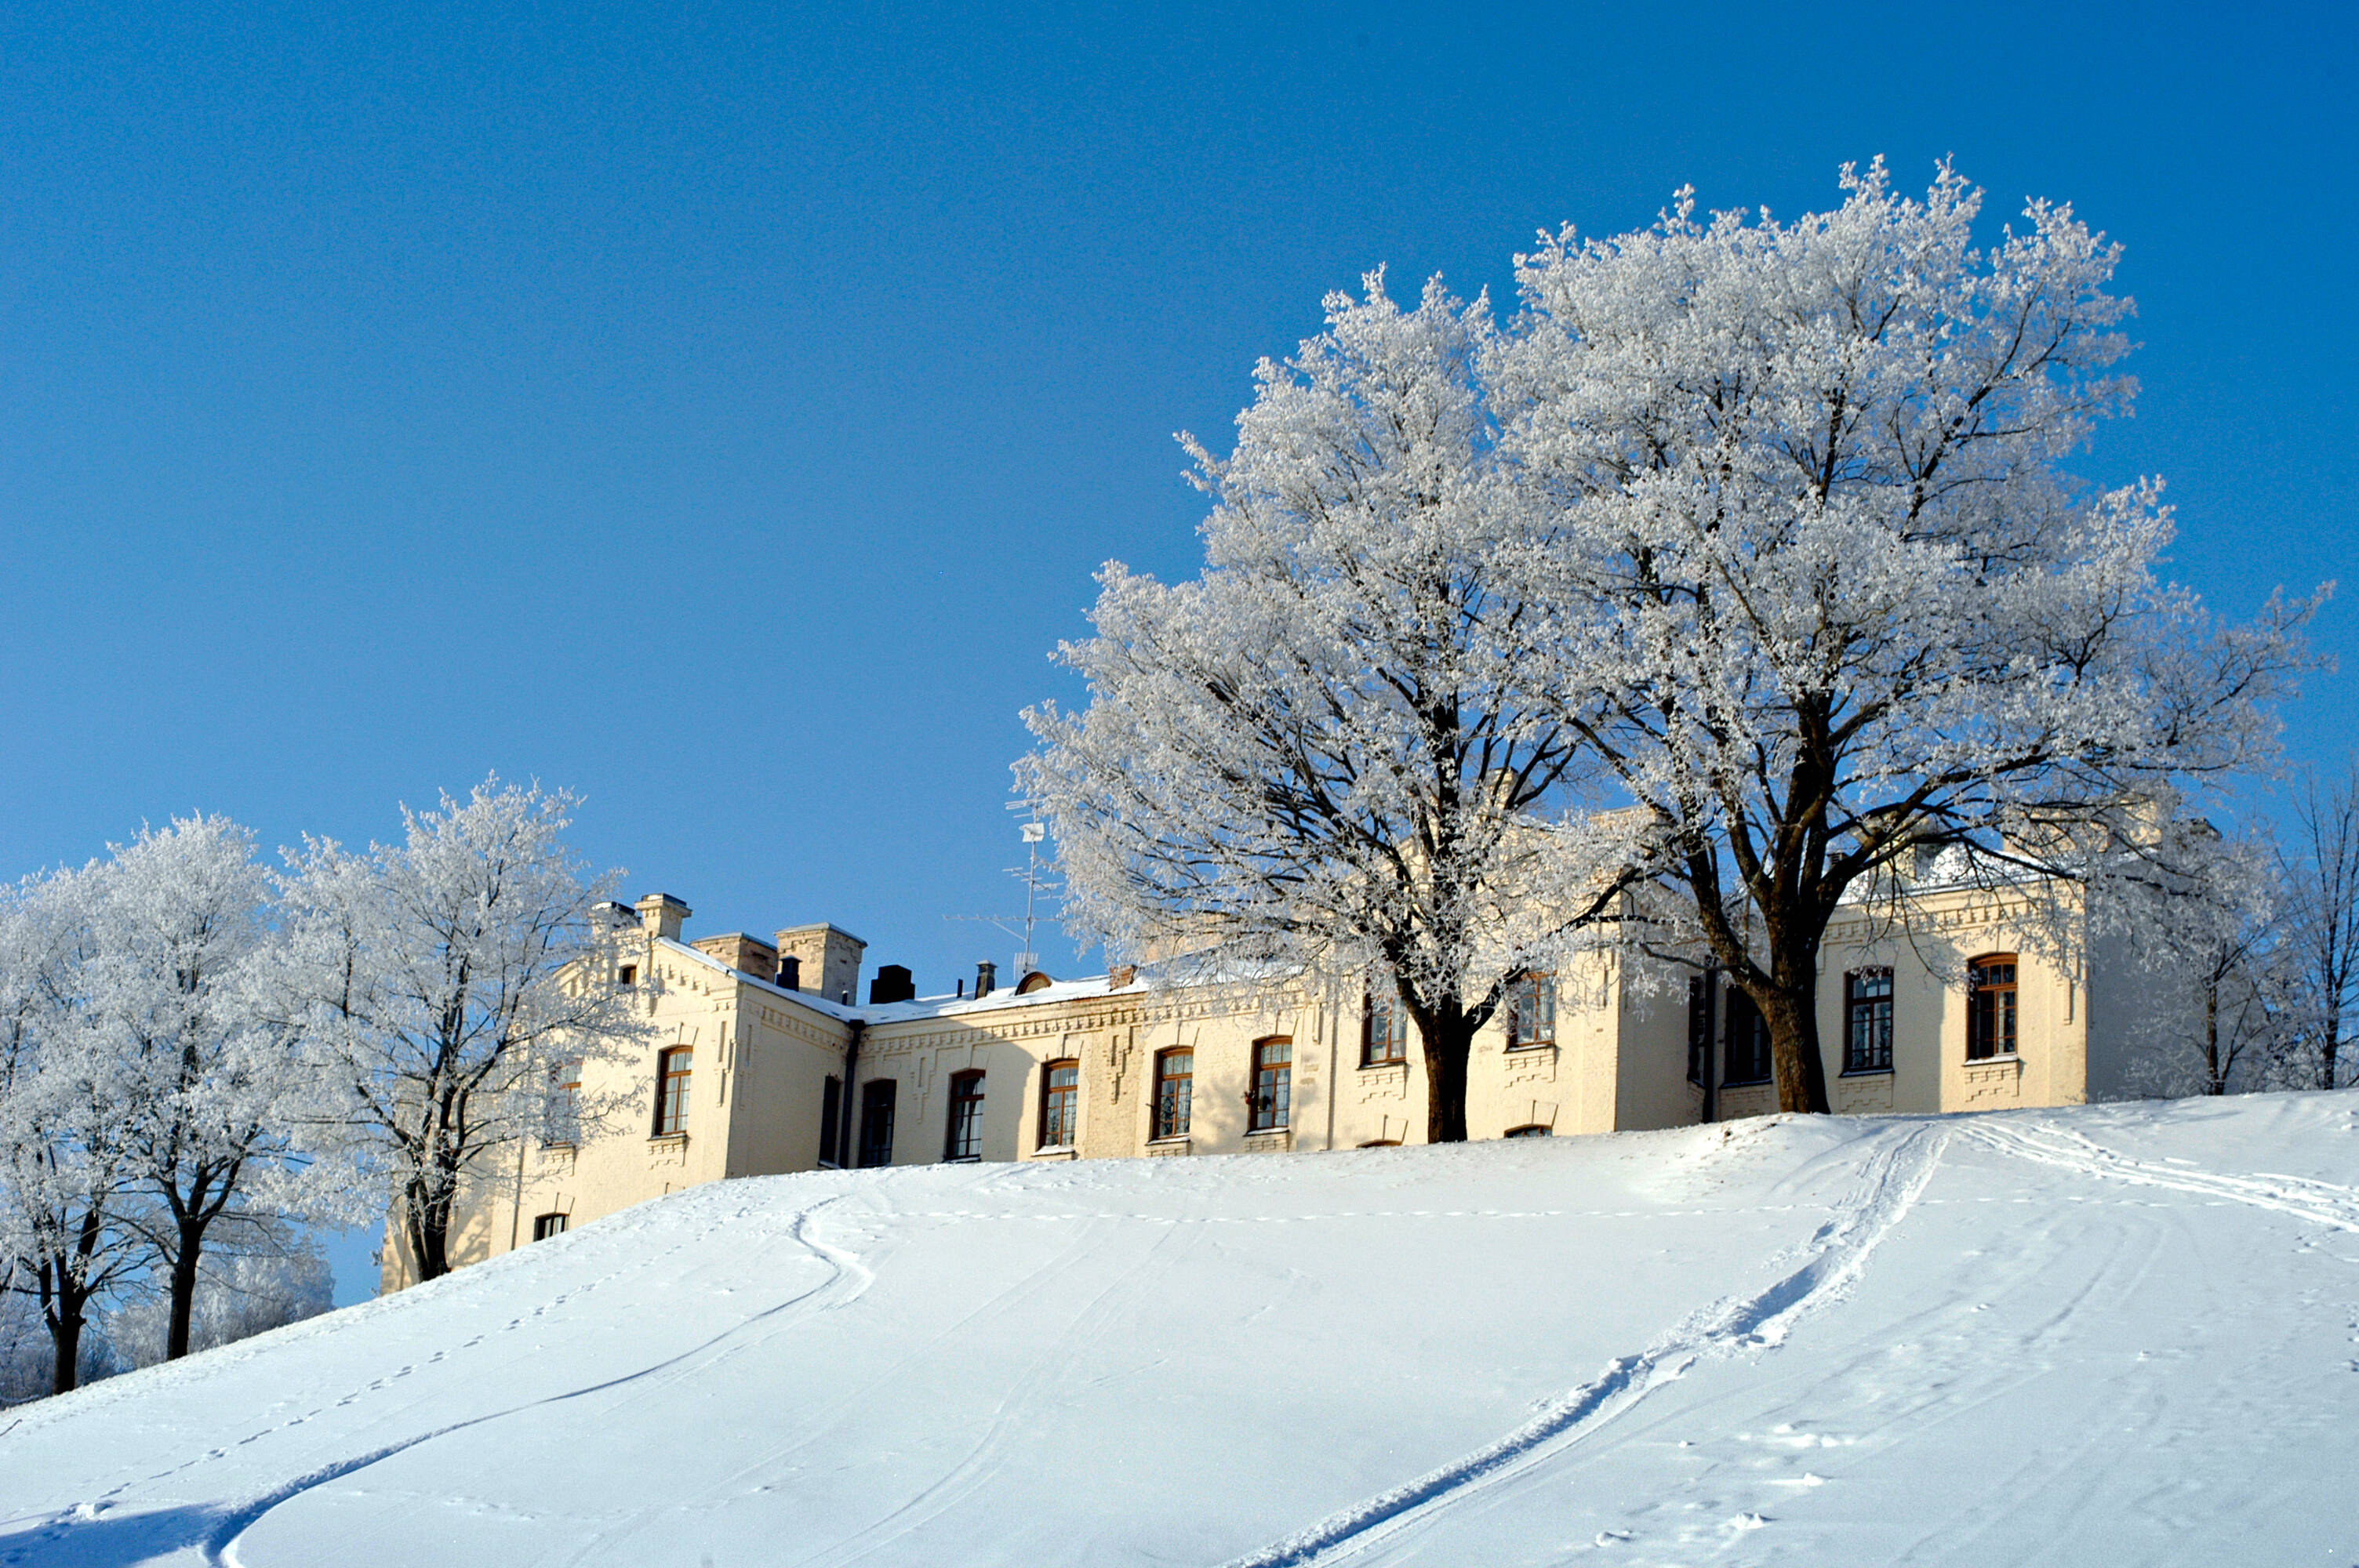 A white beautiful snow-covered building on top of a hill in an old fortress in Lappeenranta.